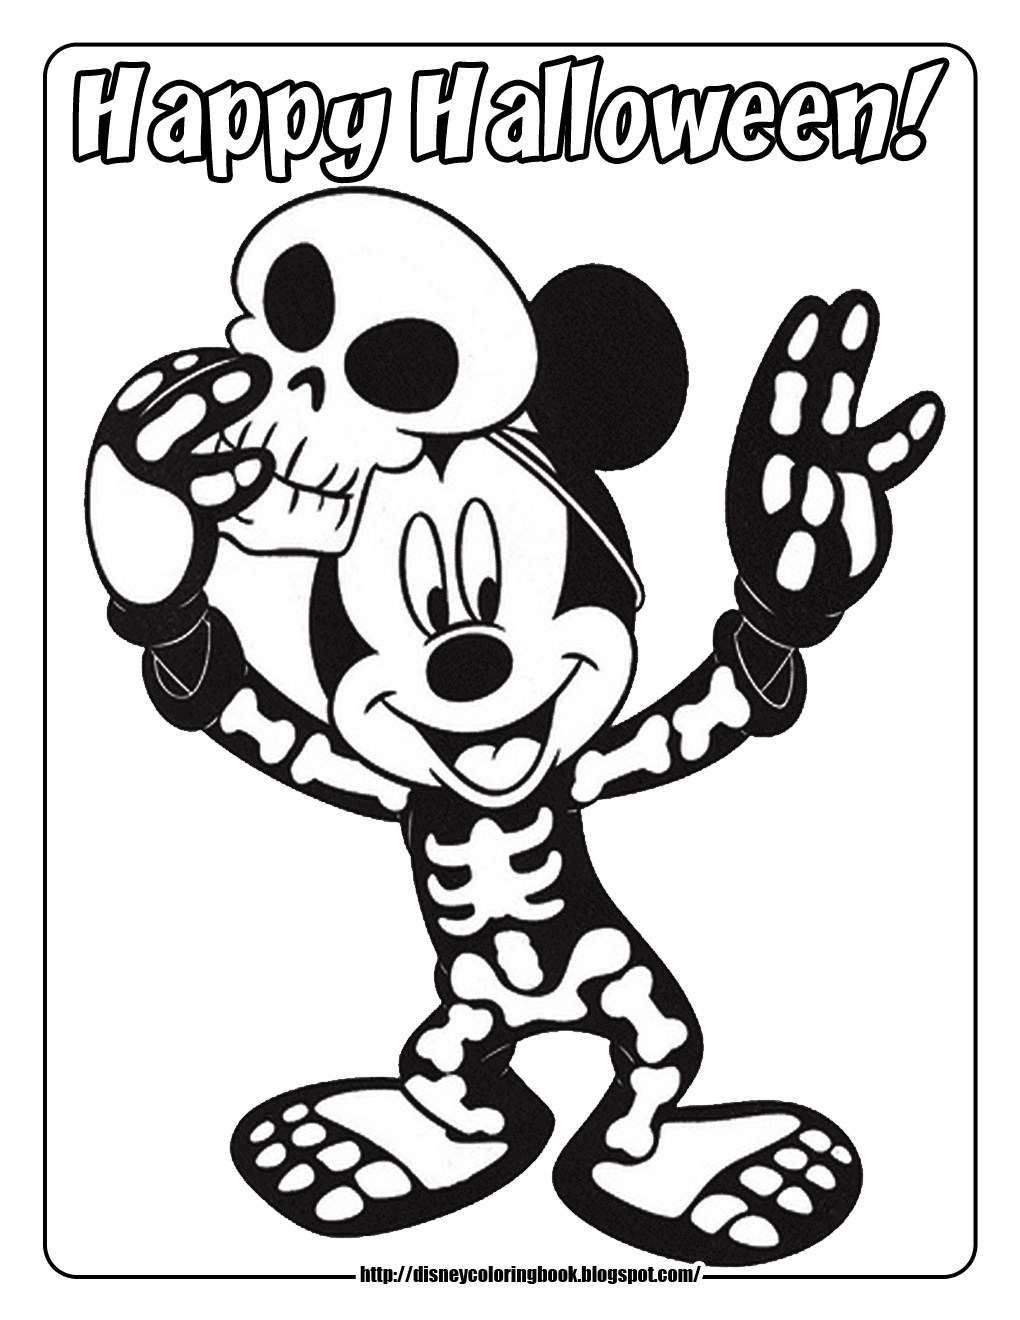 Disney Coloring Pages and Sheets for Kids: Mickey and Friends Halloween